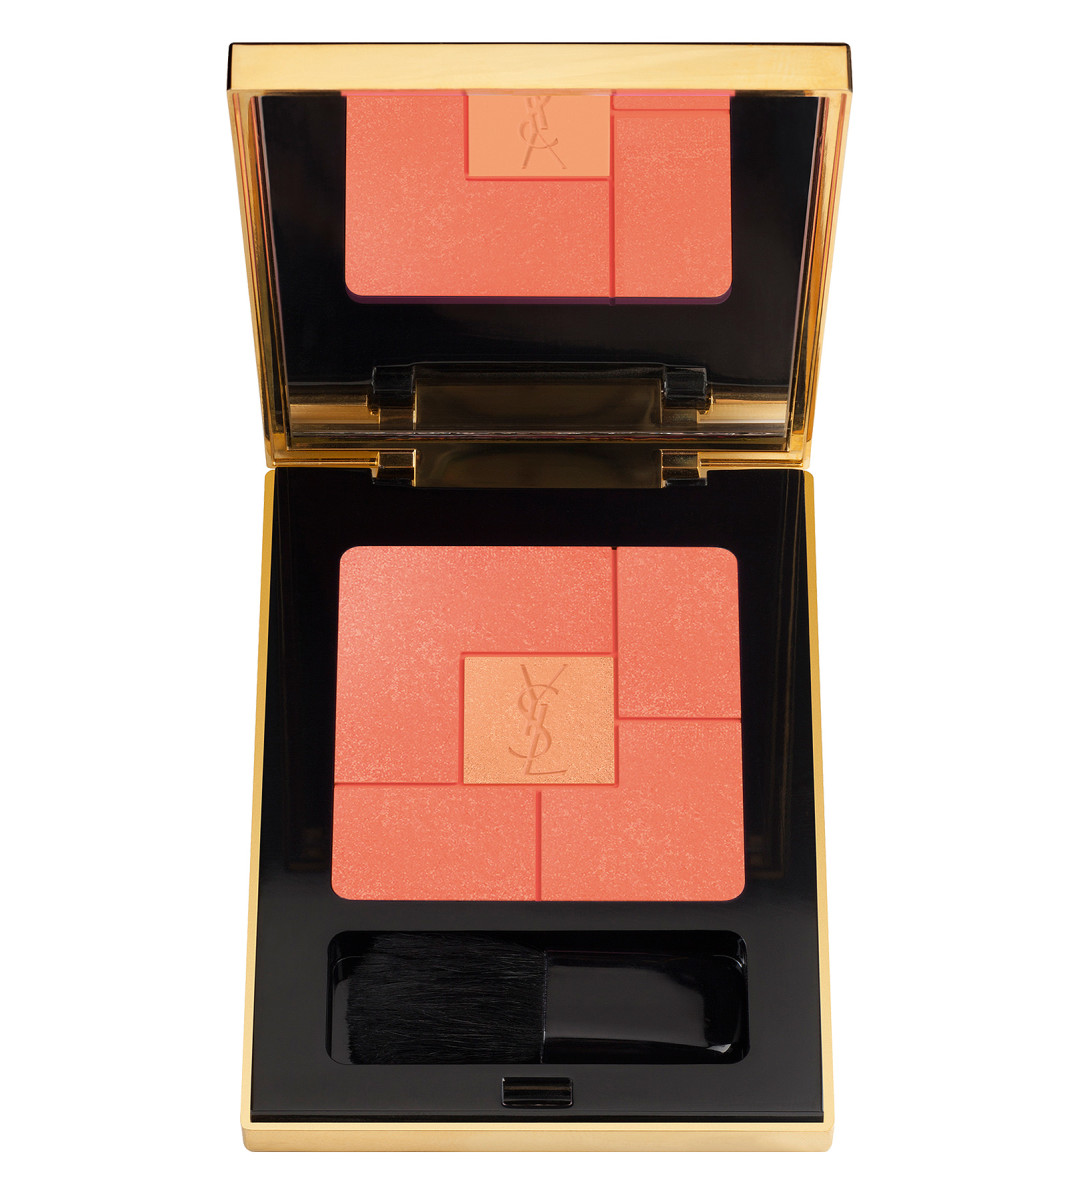 YSL Chinese New Year 2017 palette, Rouge Volupté powder blush and highlighter